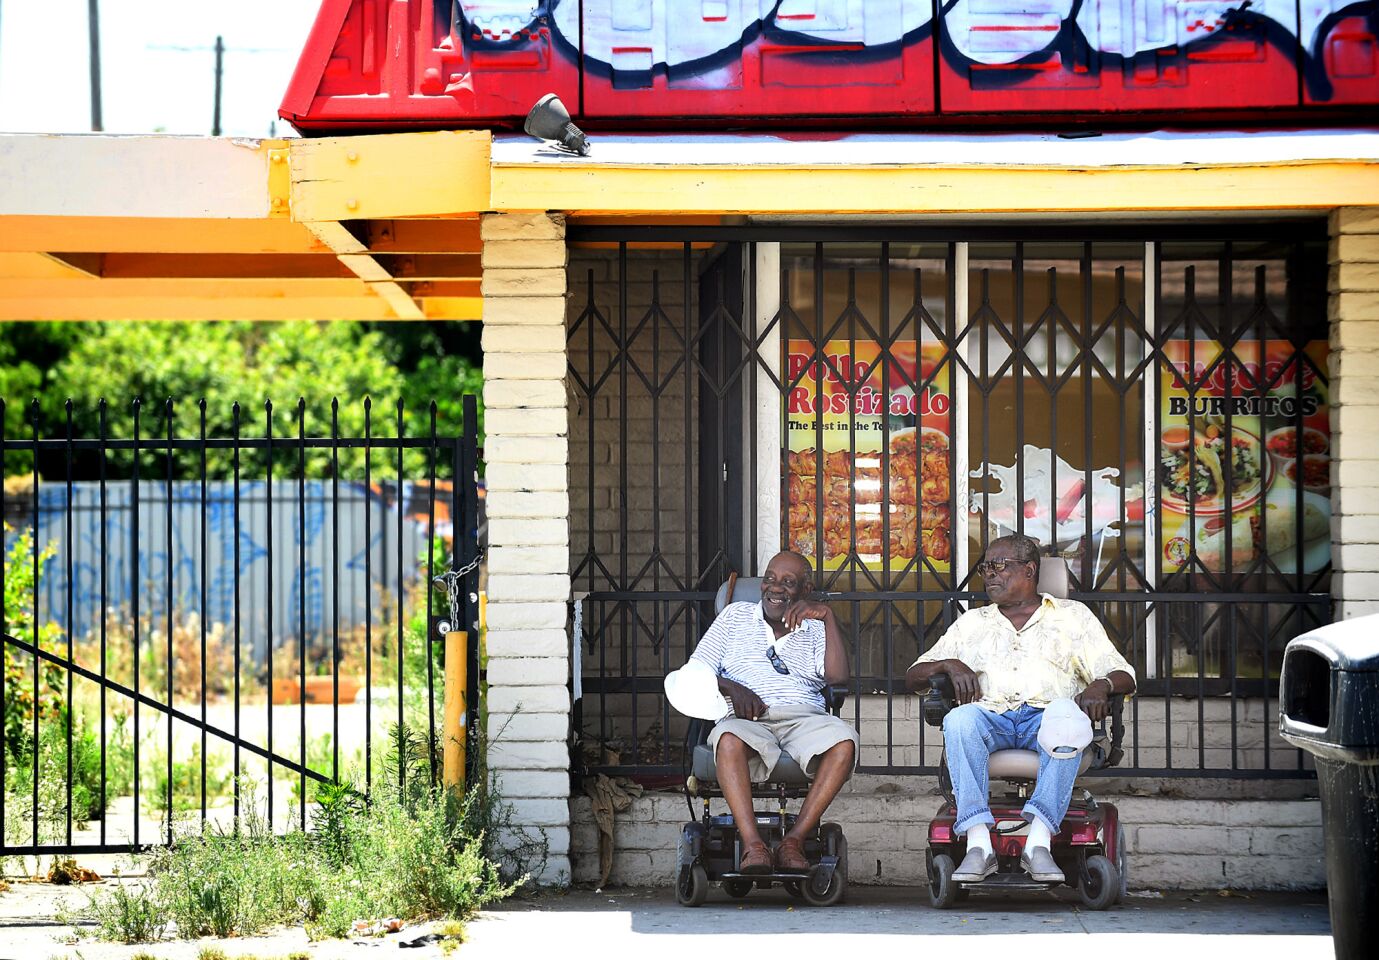 Johnny Lewis, left, and his friend of over 50 years Earl Jackson, right, find refuge in the shade of an abadoned restaurant on Vermont and 54th in Los Angeles on Friday, during the region's latest heat wave.